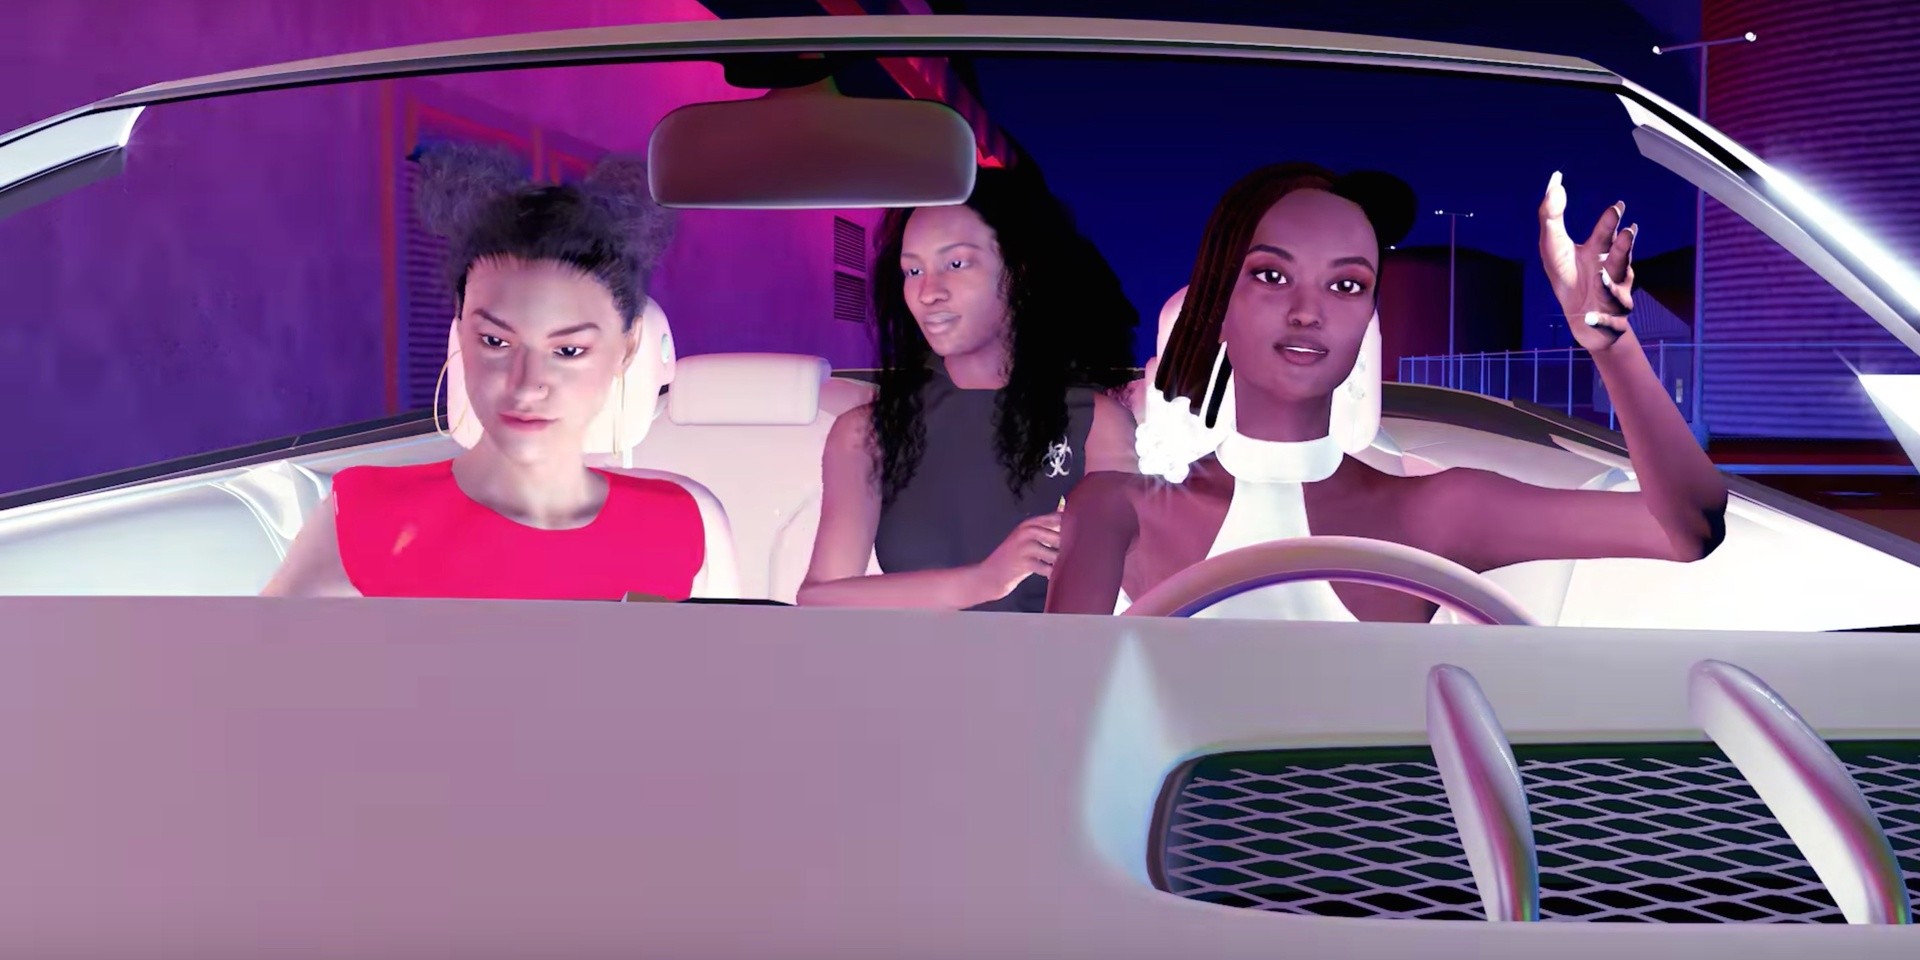 Kelela's music video for 'Frontline' is Sims-inspired and frankly, kind of unsettling – watch